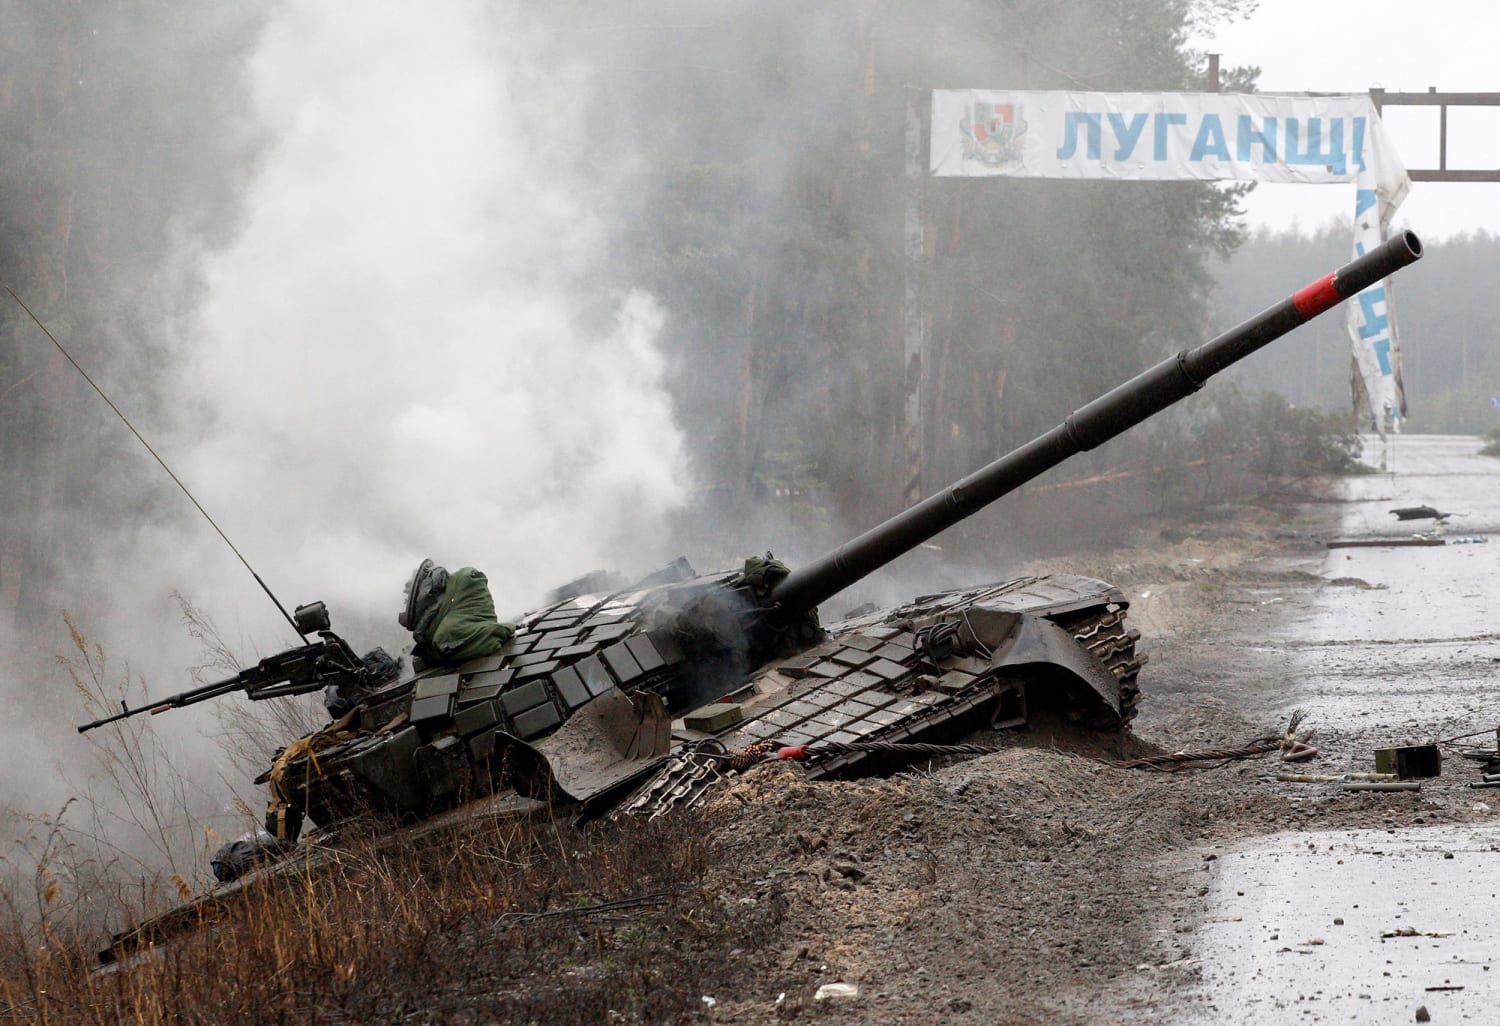 A rush to failure': How the Russian military started off so badly in Ukraine